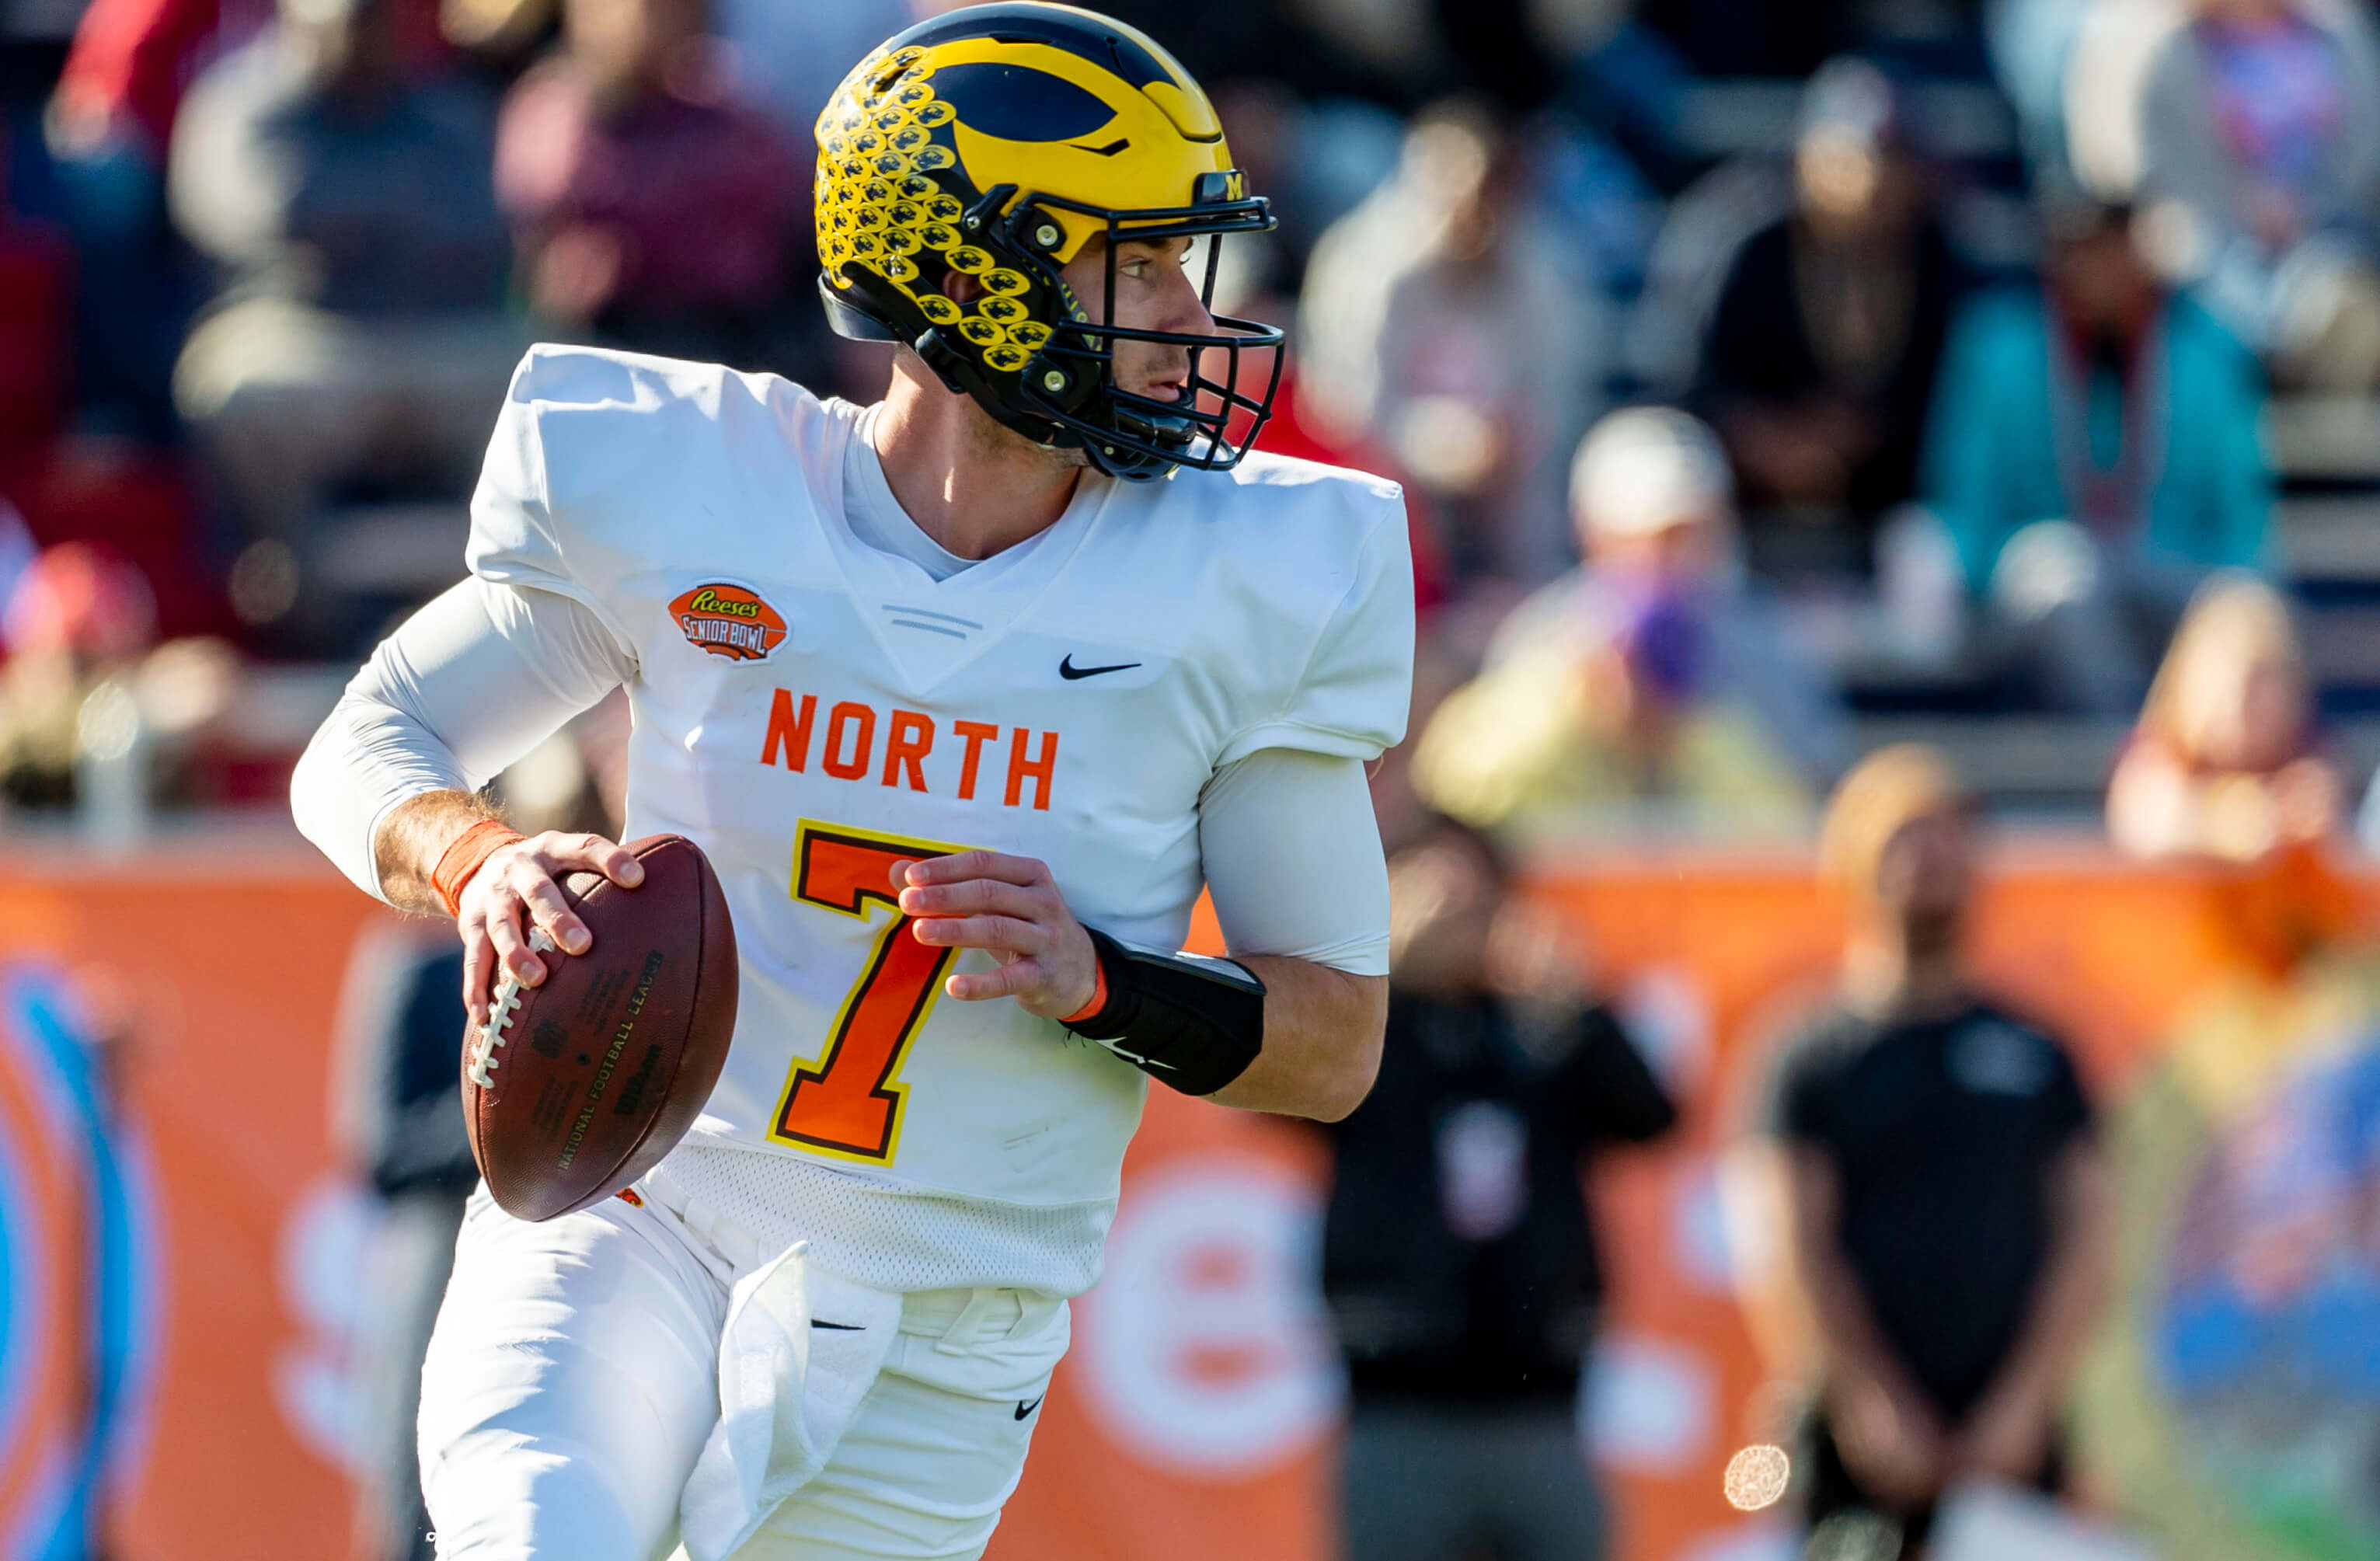 North quarterback Shea Patterson of Michigan (7) rolls out during the 2020 Senior Bowl college football game at Ladd-Peebles Stadium.